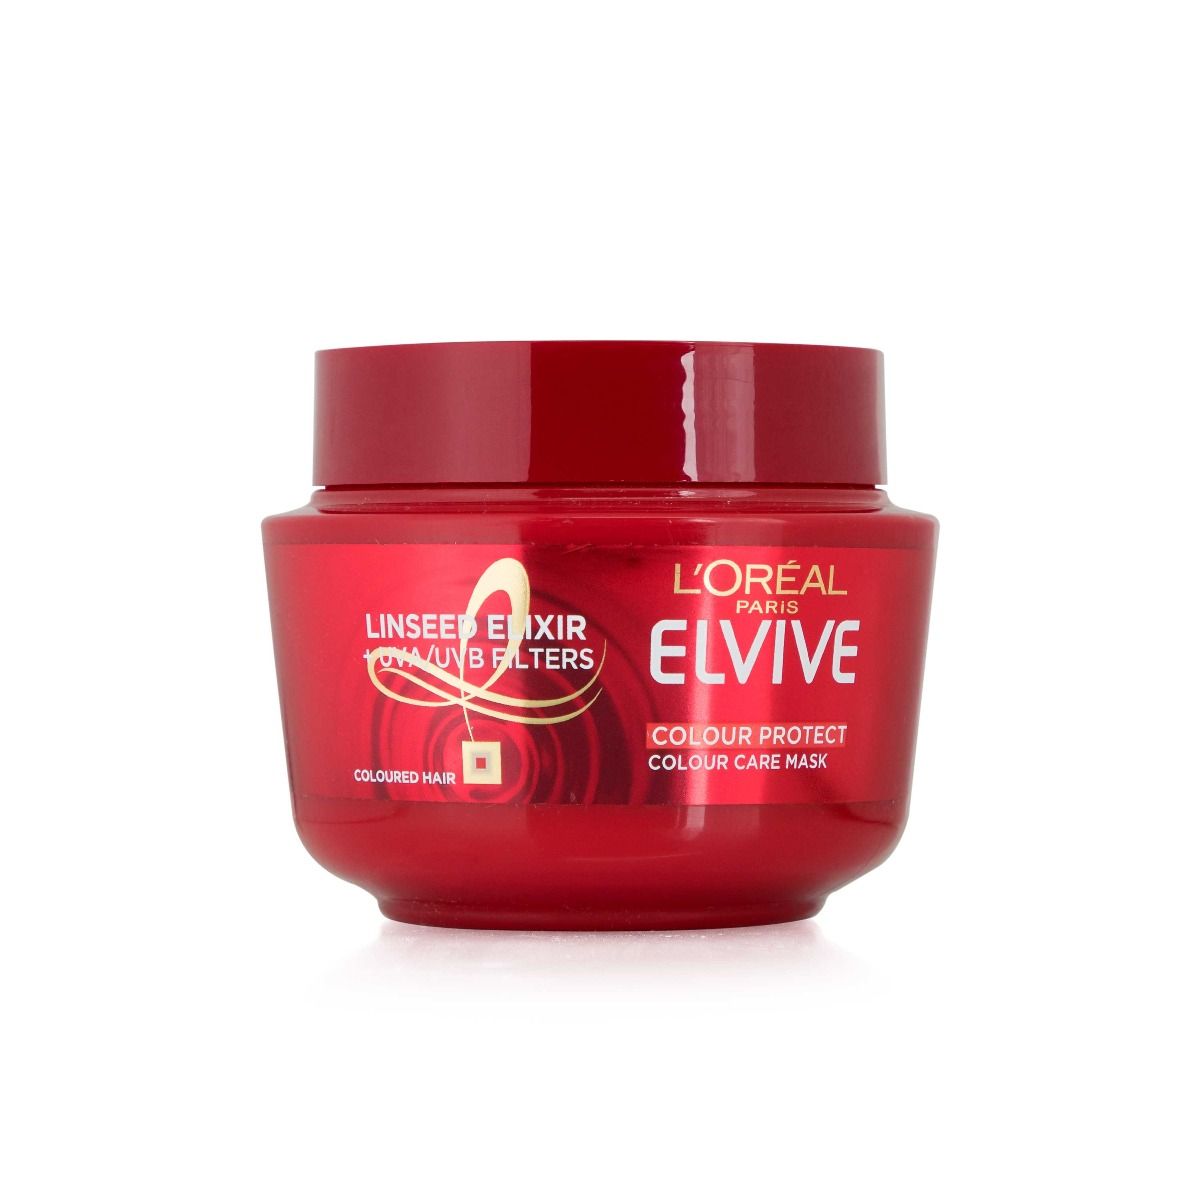 L'Oreal Elvive Colour Protect Intensive Hair Mask - Christines Pharmacy